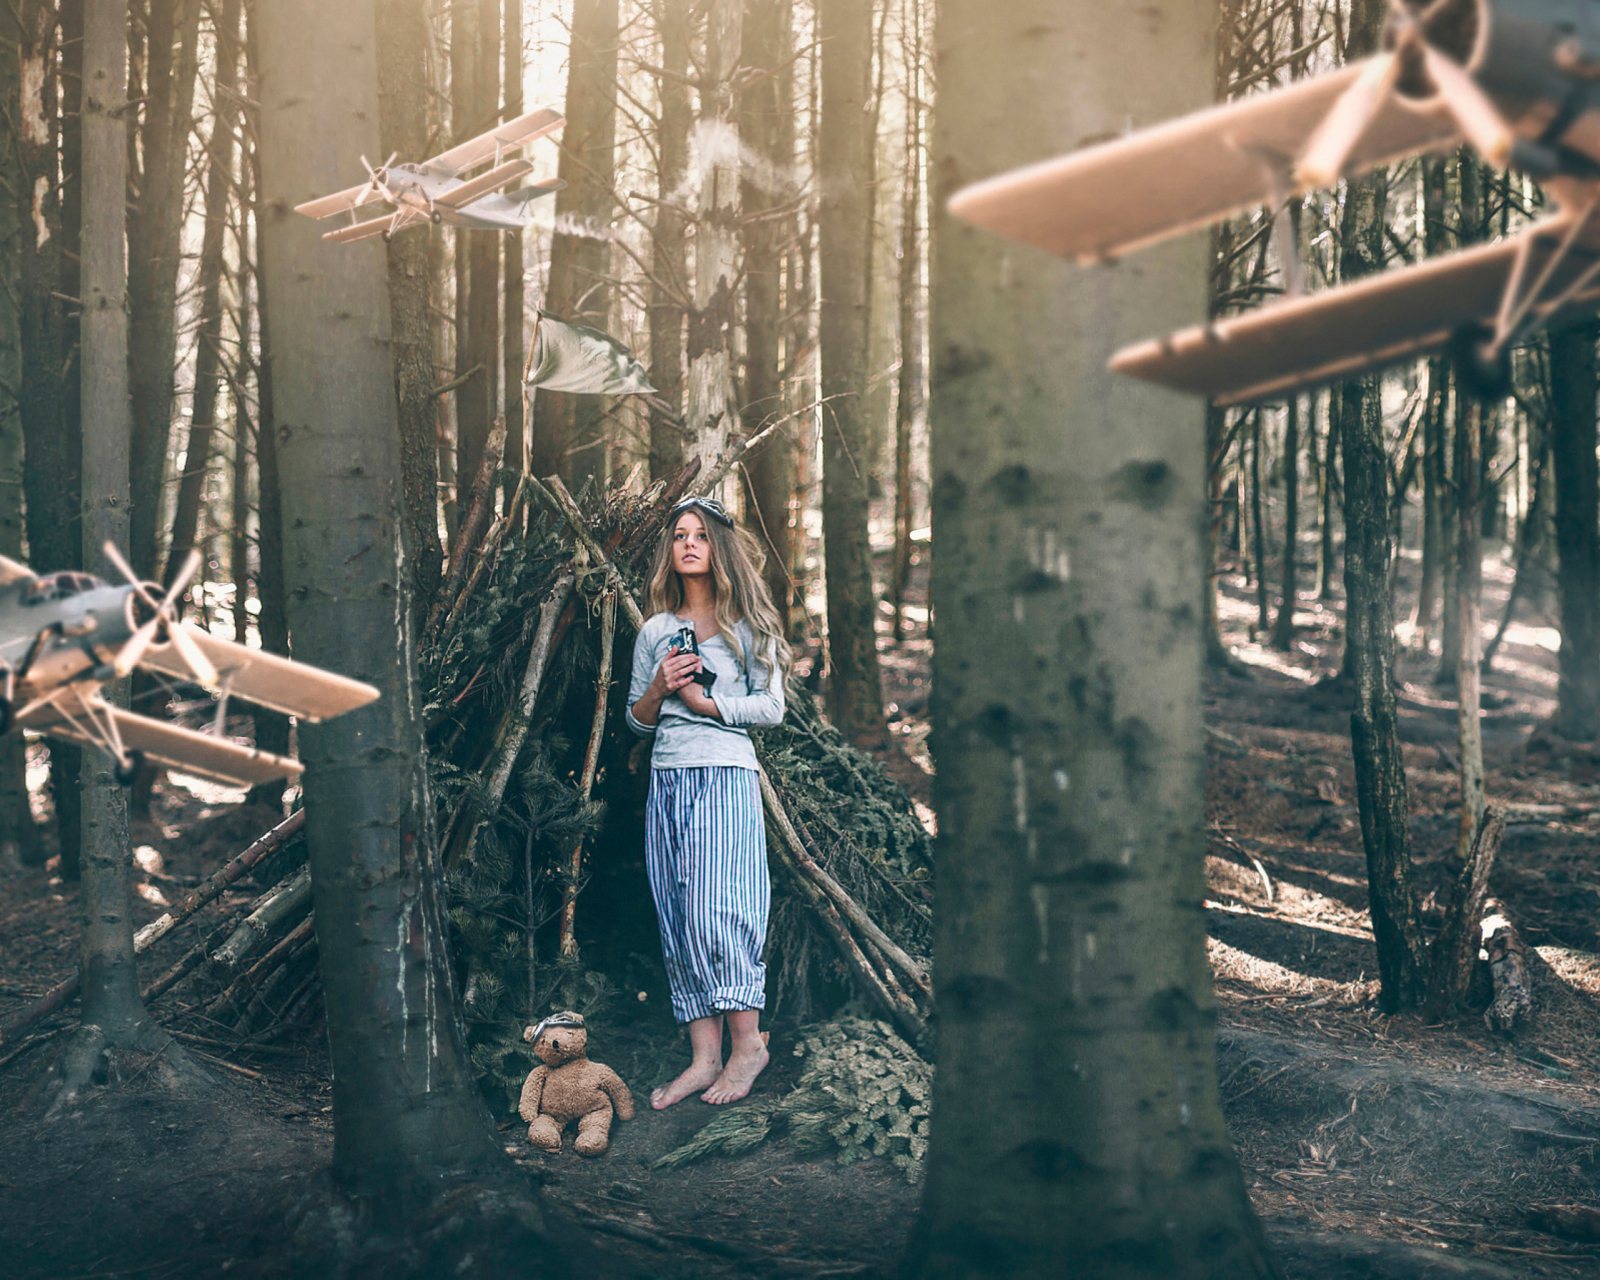 Girl And Teddy Bear In Forest By Rosie Hardy wallpaper 1600x1280